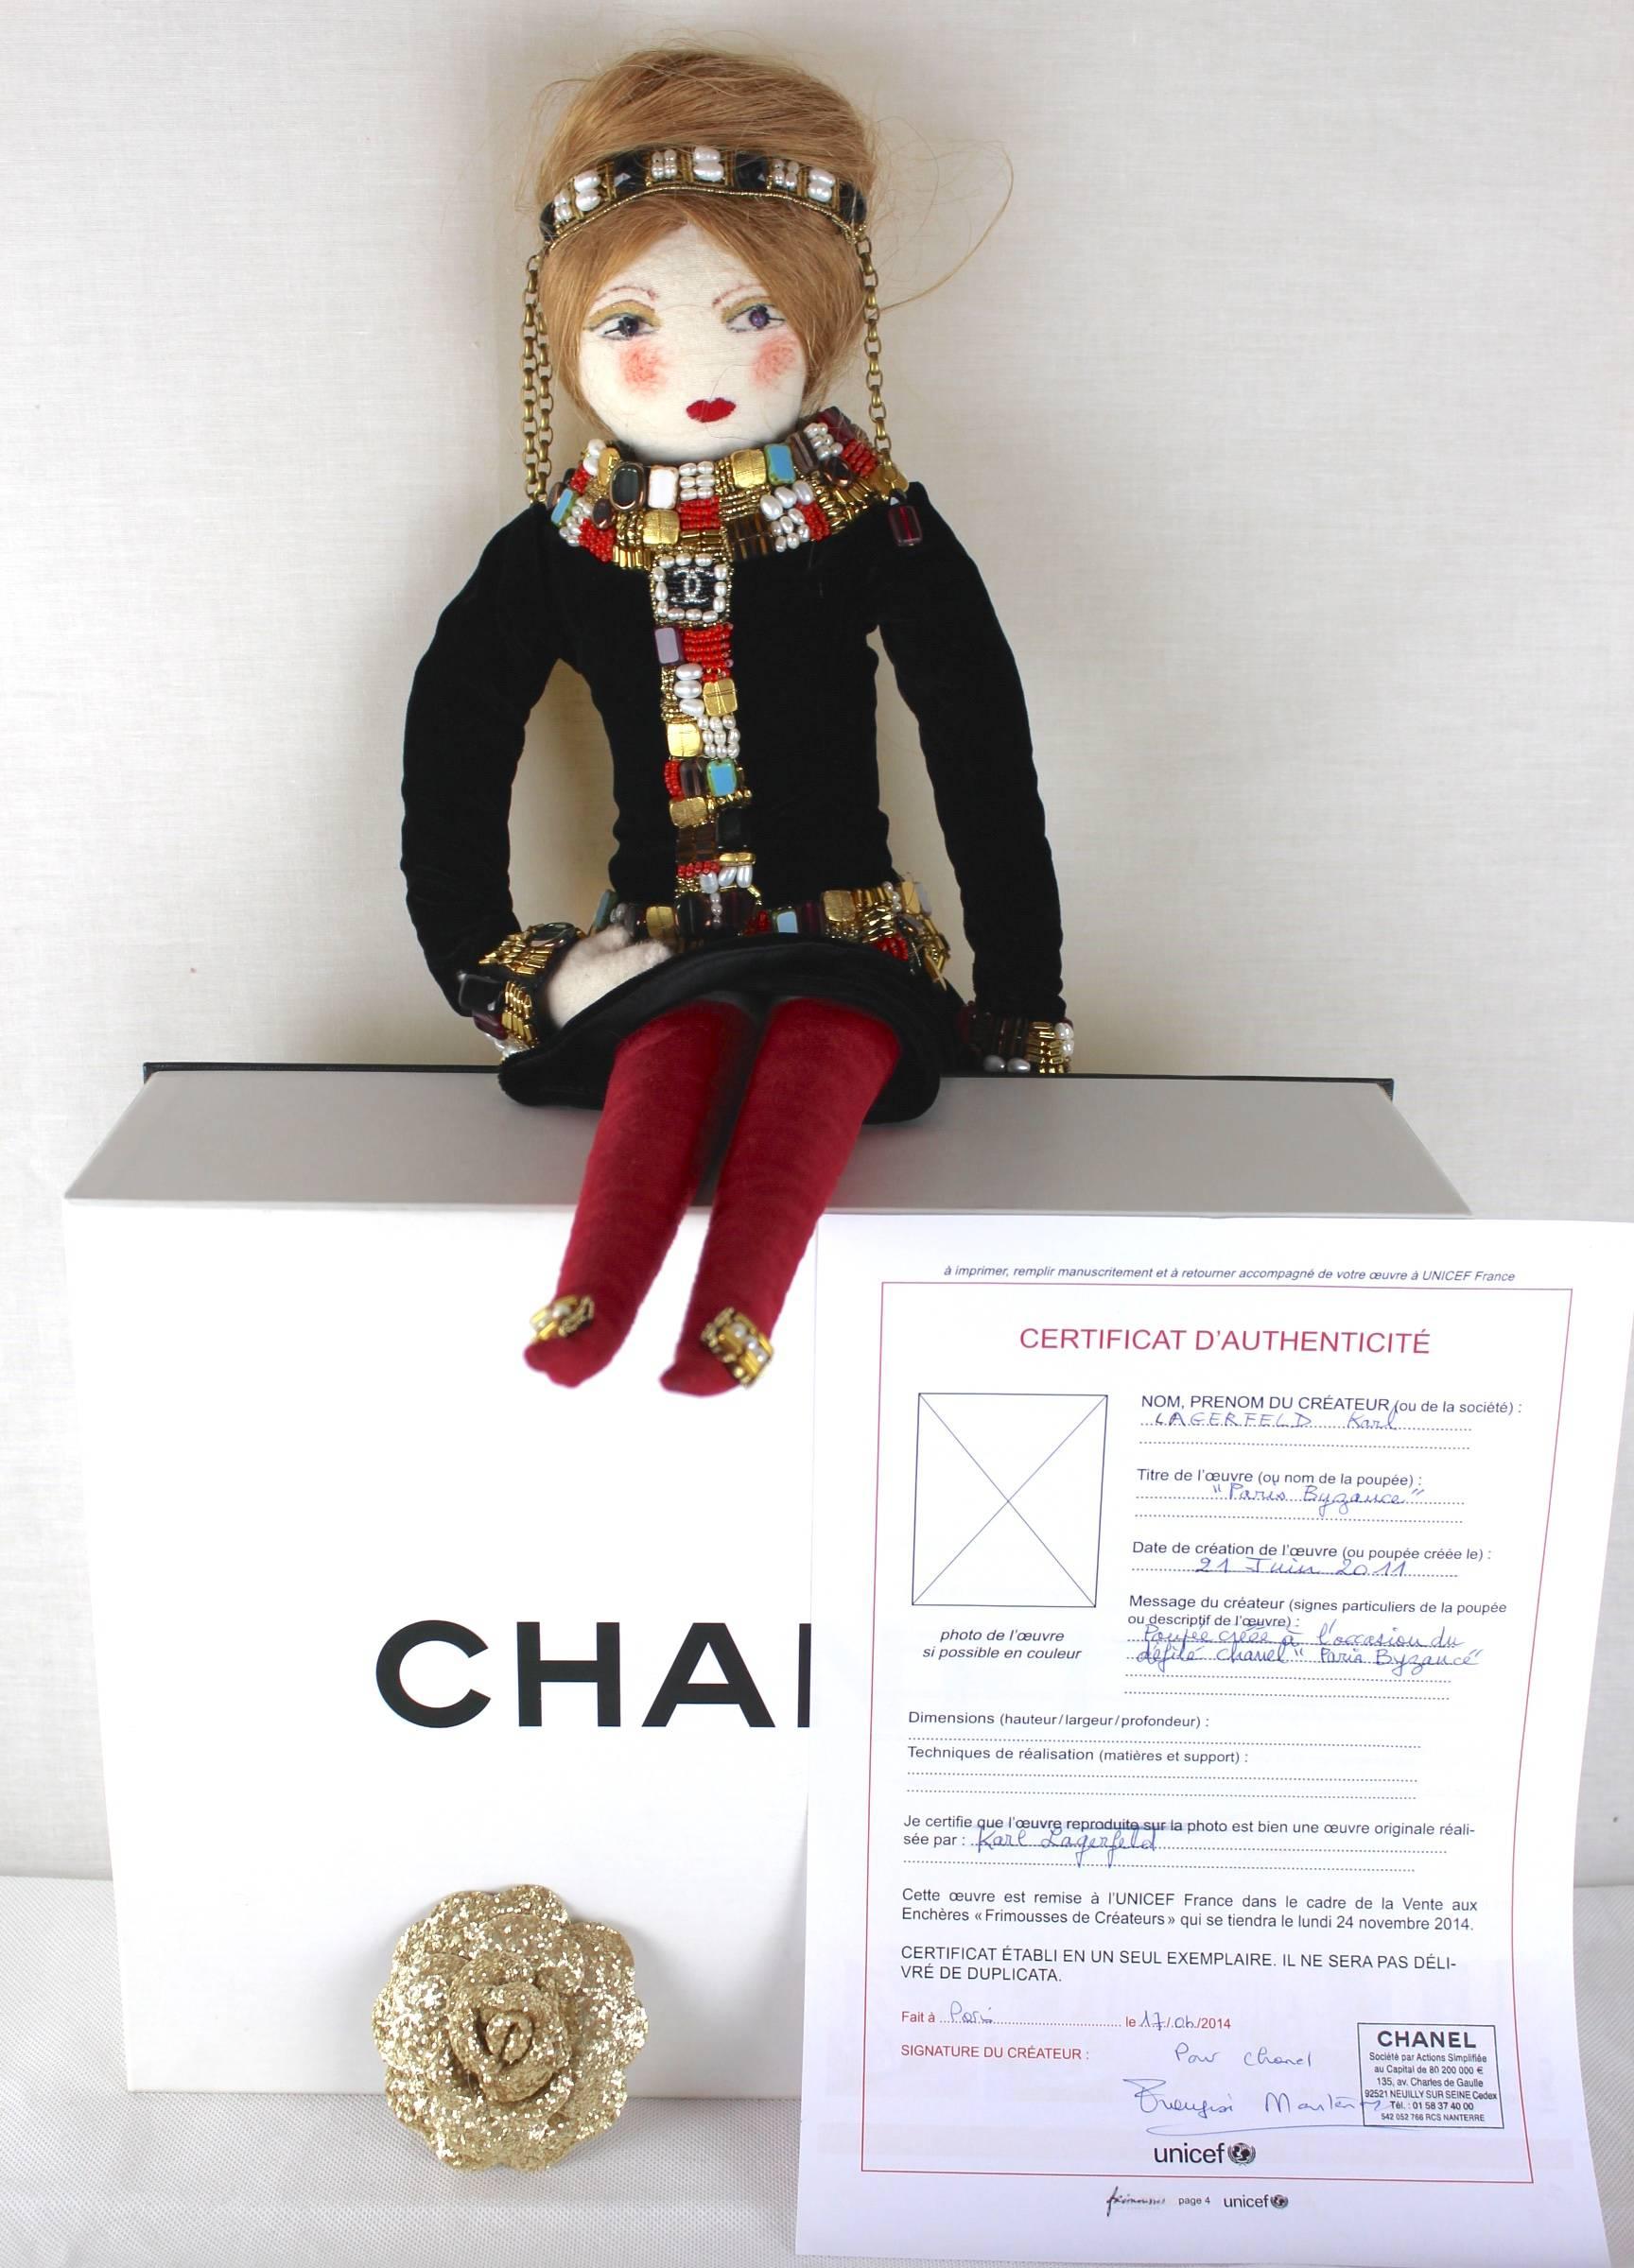 Chanel Byzance Paris Collectors Doll
Lesage Hand Beaded 
Semi Precious Stones and Natural Freshwater Pearls
Certificate of Authenticity 
Boxed and includes Chanel Silver Glitter Camellia 
An exceptional piece from Karl Lagerfeld-Chanel stands 2